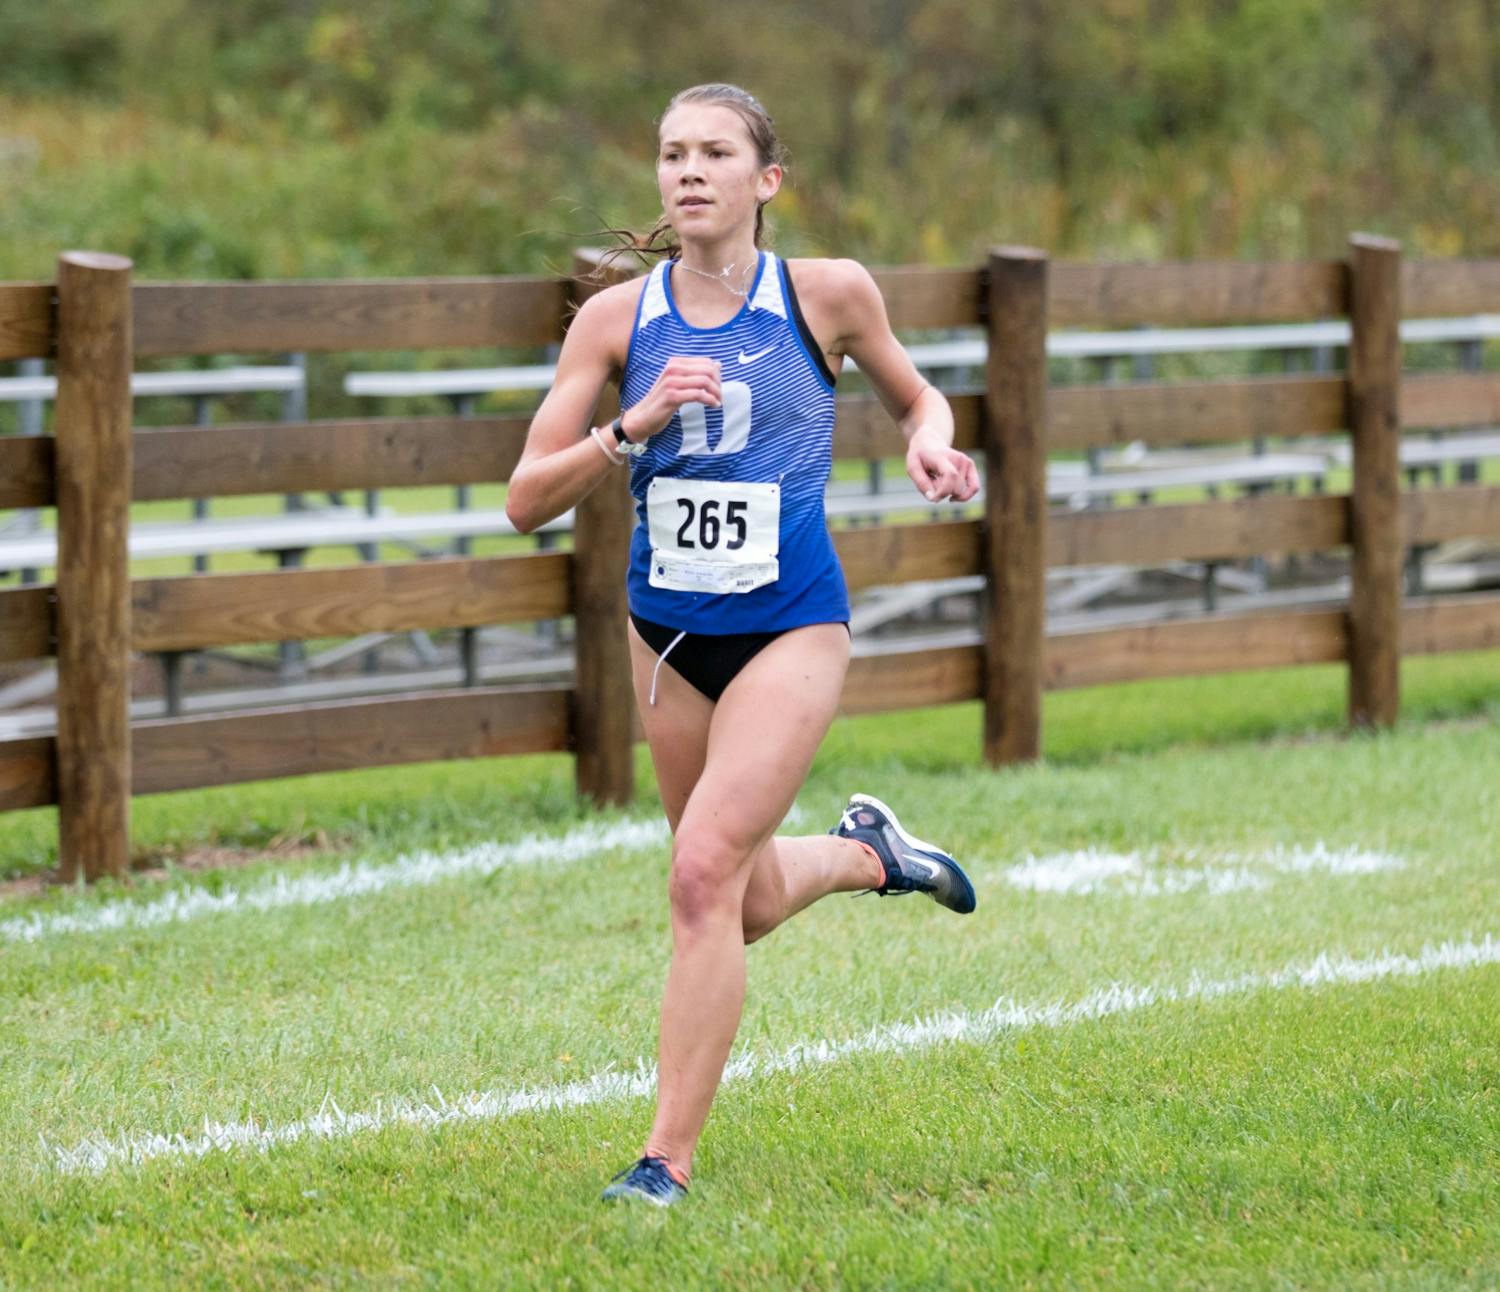 Senior Amanda Beach's return to form this season could have a huge impact for the Blue Devils.